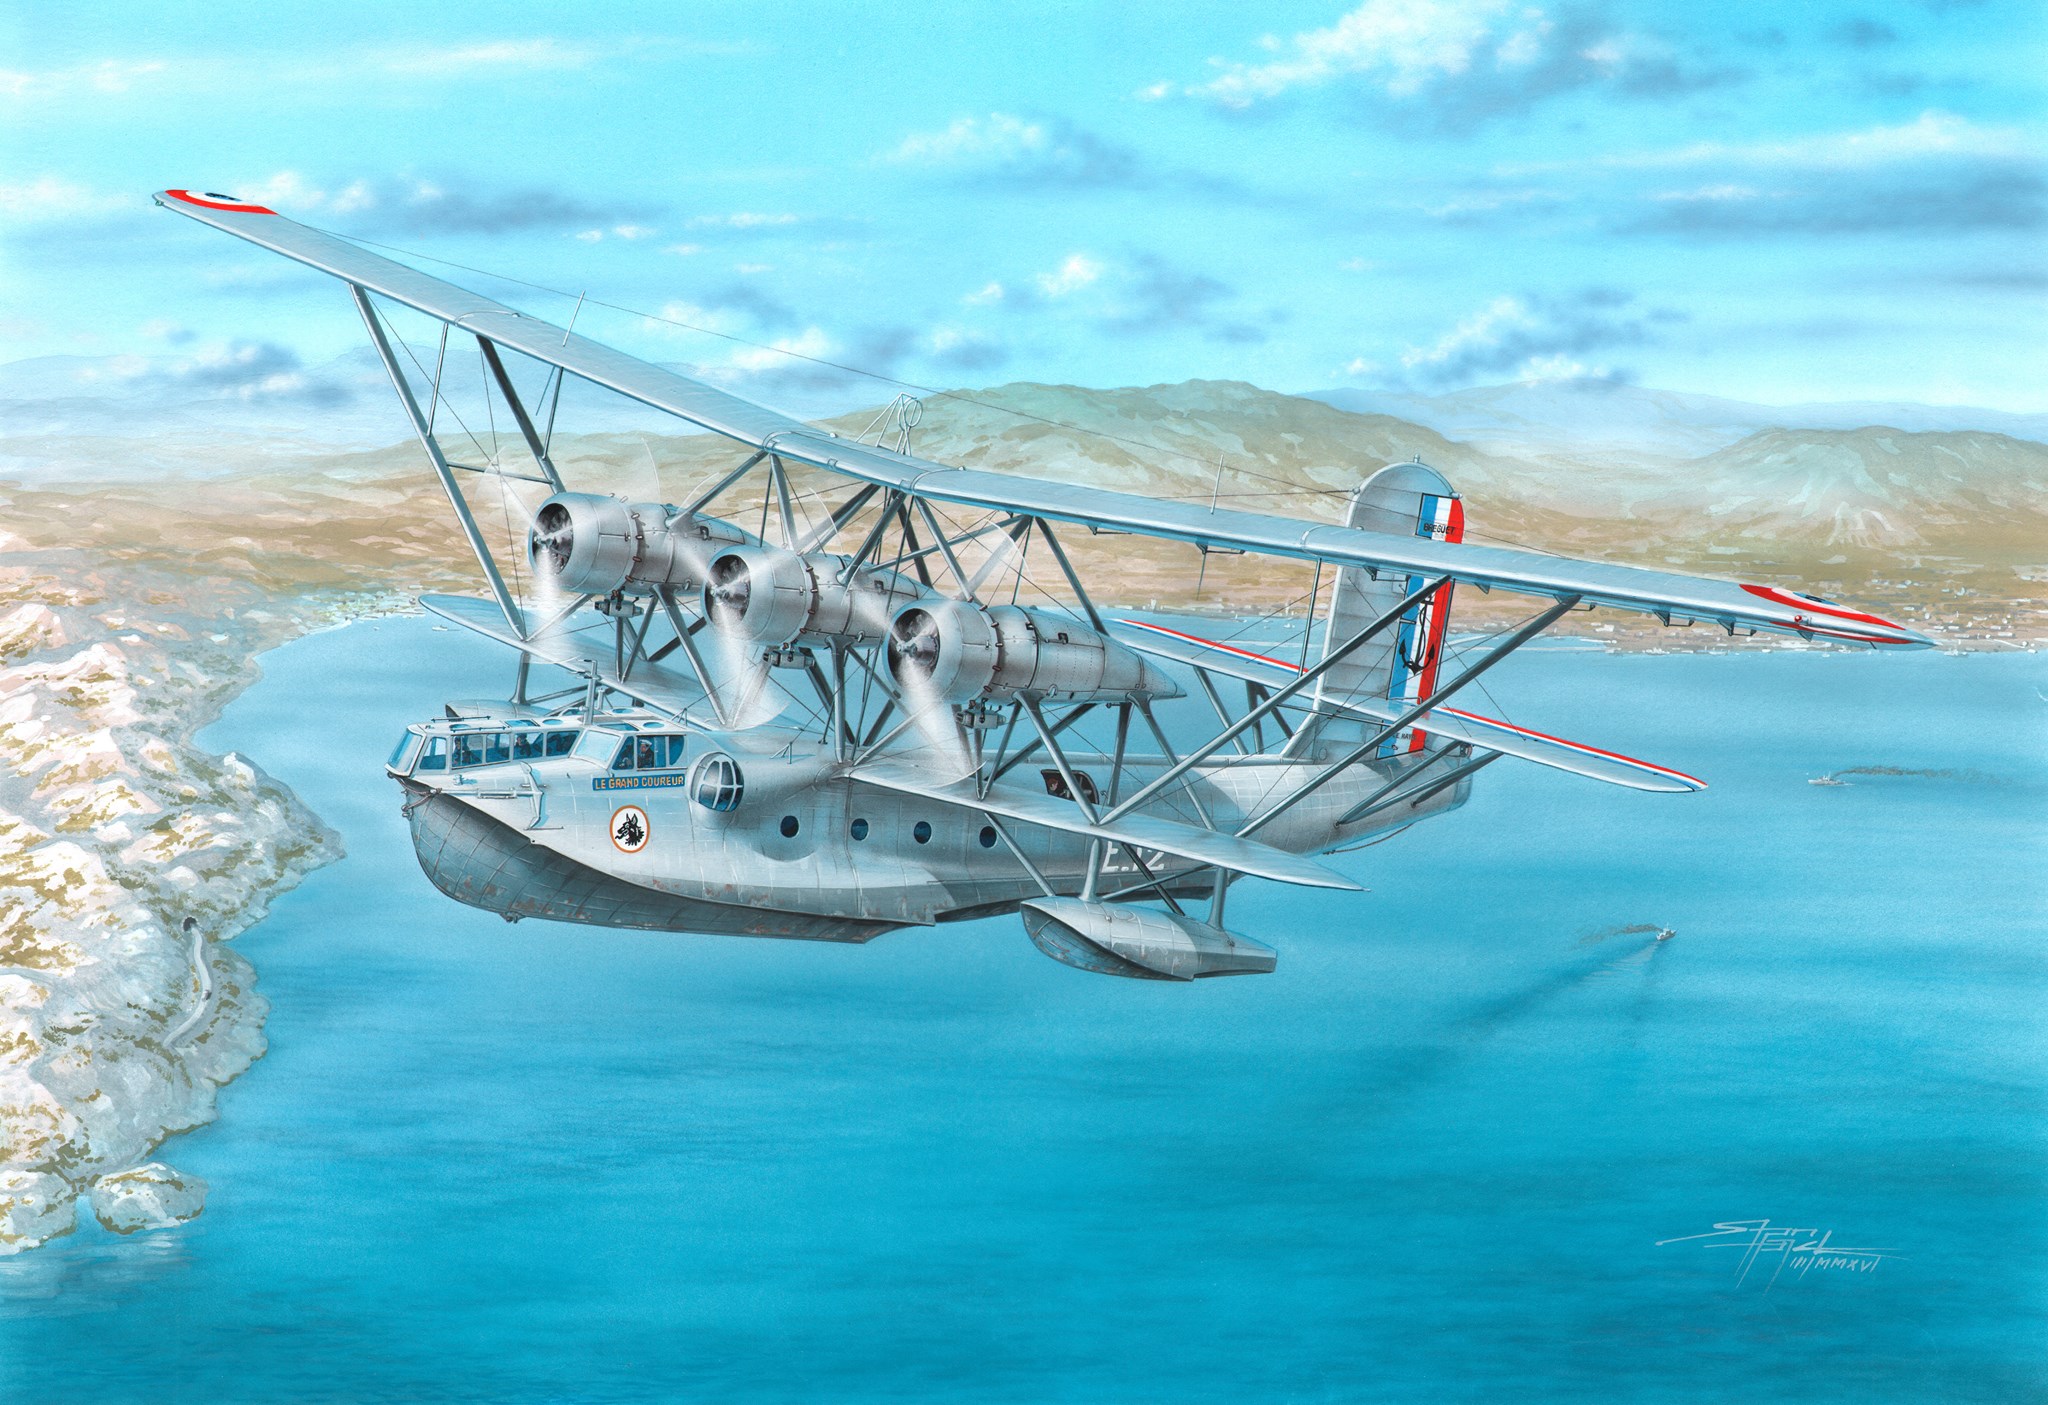 General 2048x1405 aircraft military army sea sky flying military vehicle clouds water signature artwork Flying boat Stan Hajek French navy